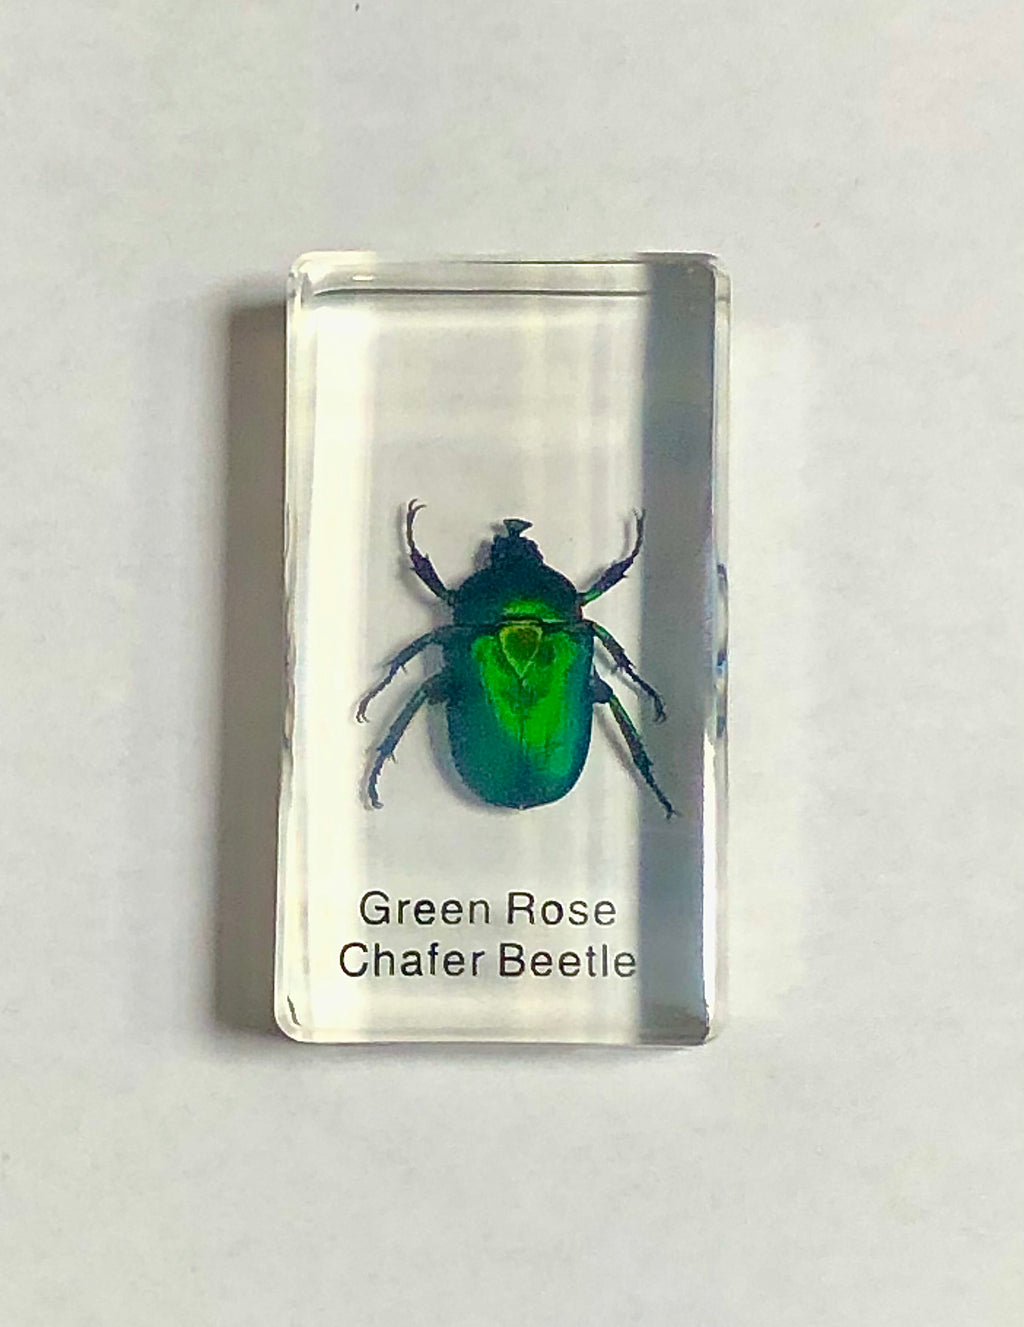 Green Rose Chafer Beetle in Lucite